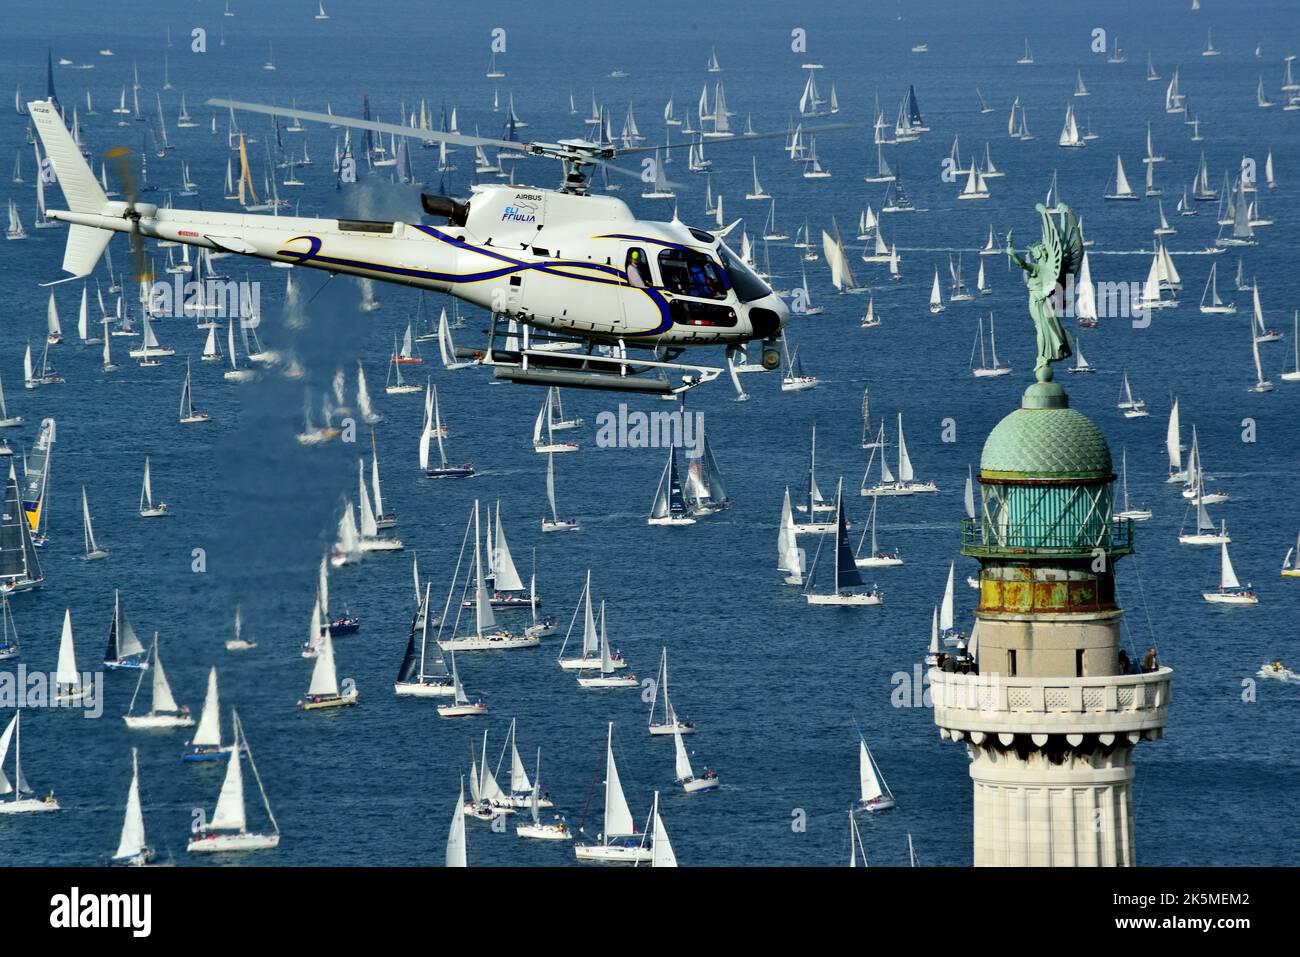 Trieste, Italy. October 9th, 2022. Barcolana number 54. 1614 sailboats at the start of the largest regatta in the world. The American Deep Blue, 26 meters and 25 tons,with Wendy at th helm, triumphs. The first Barcolana Won by a woman. Stock Photo